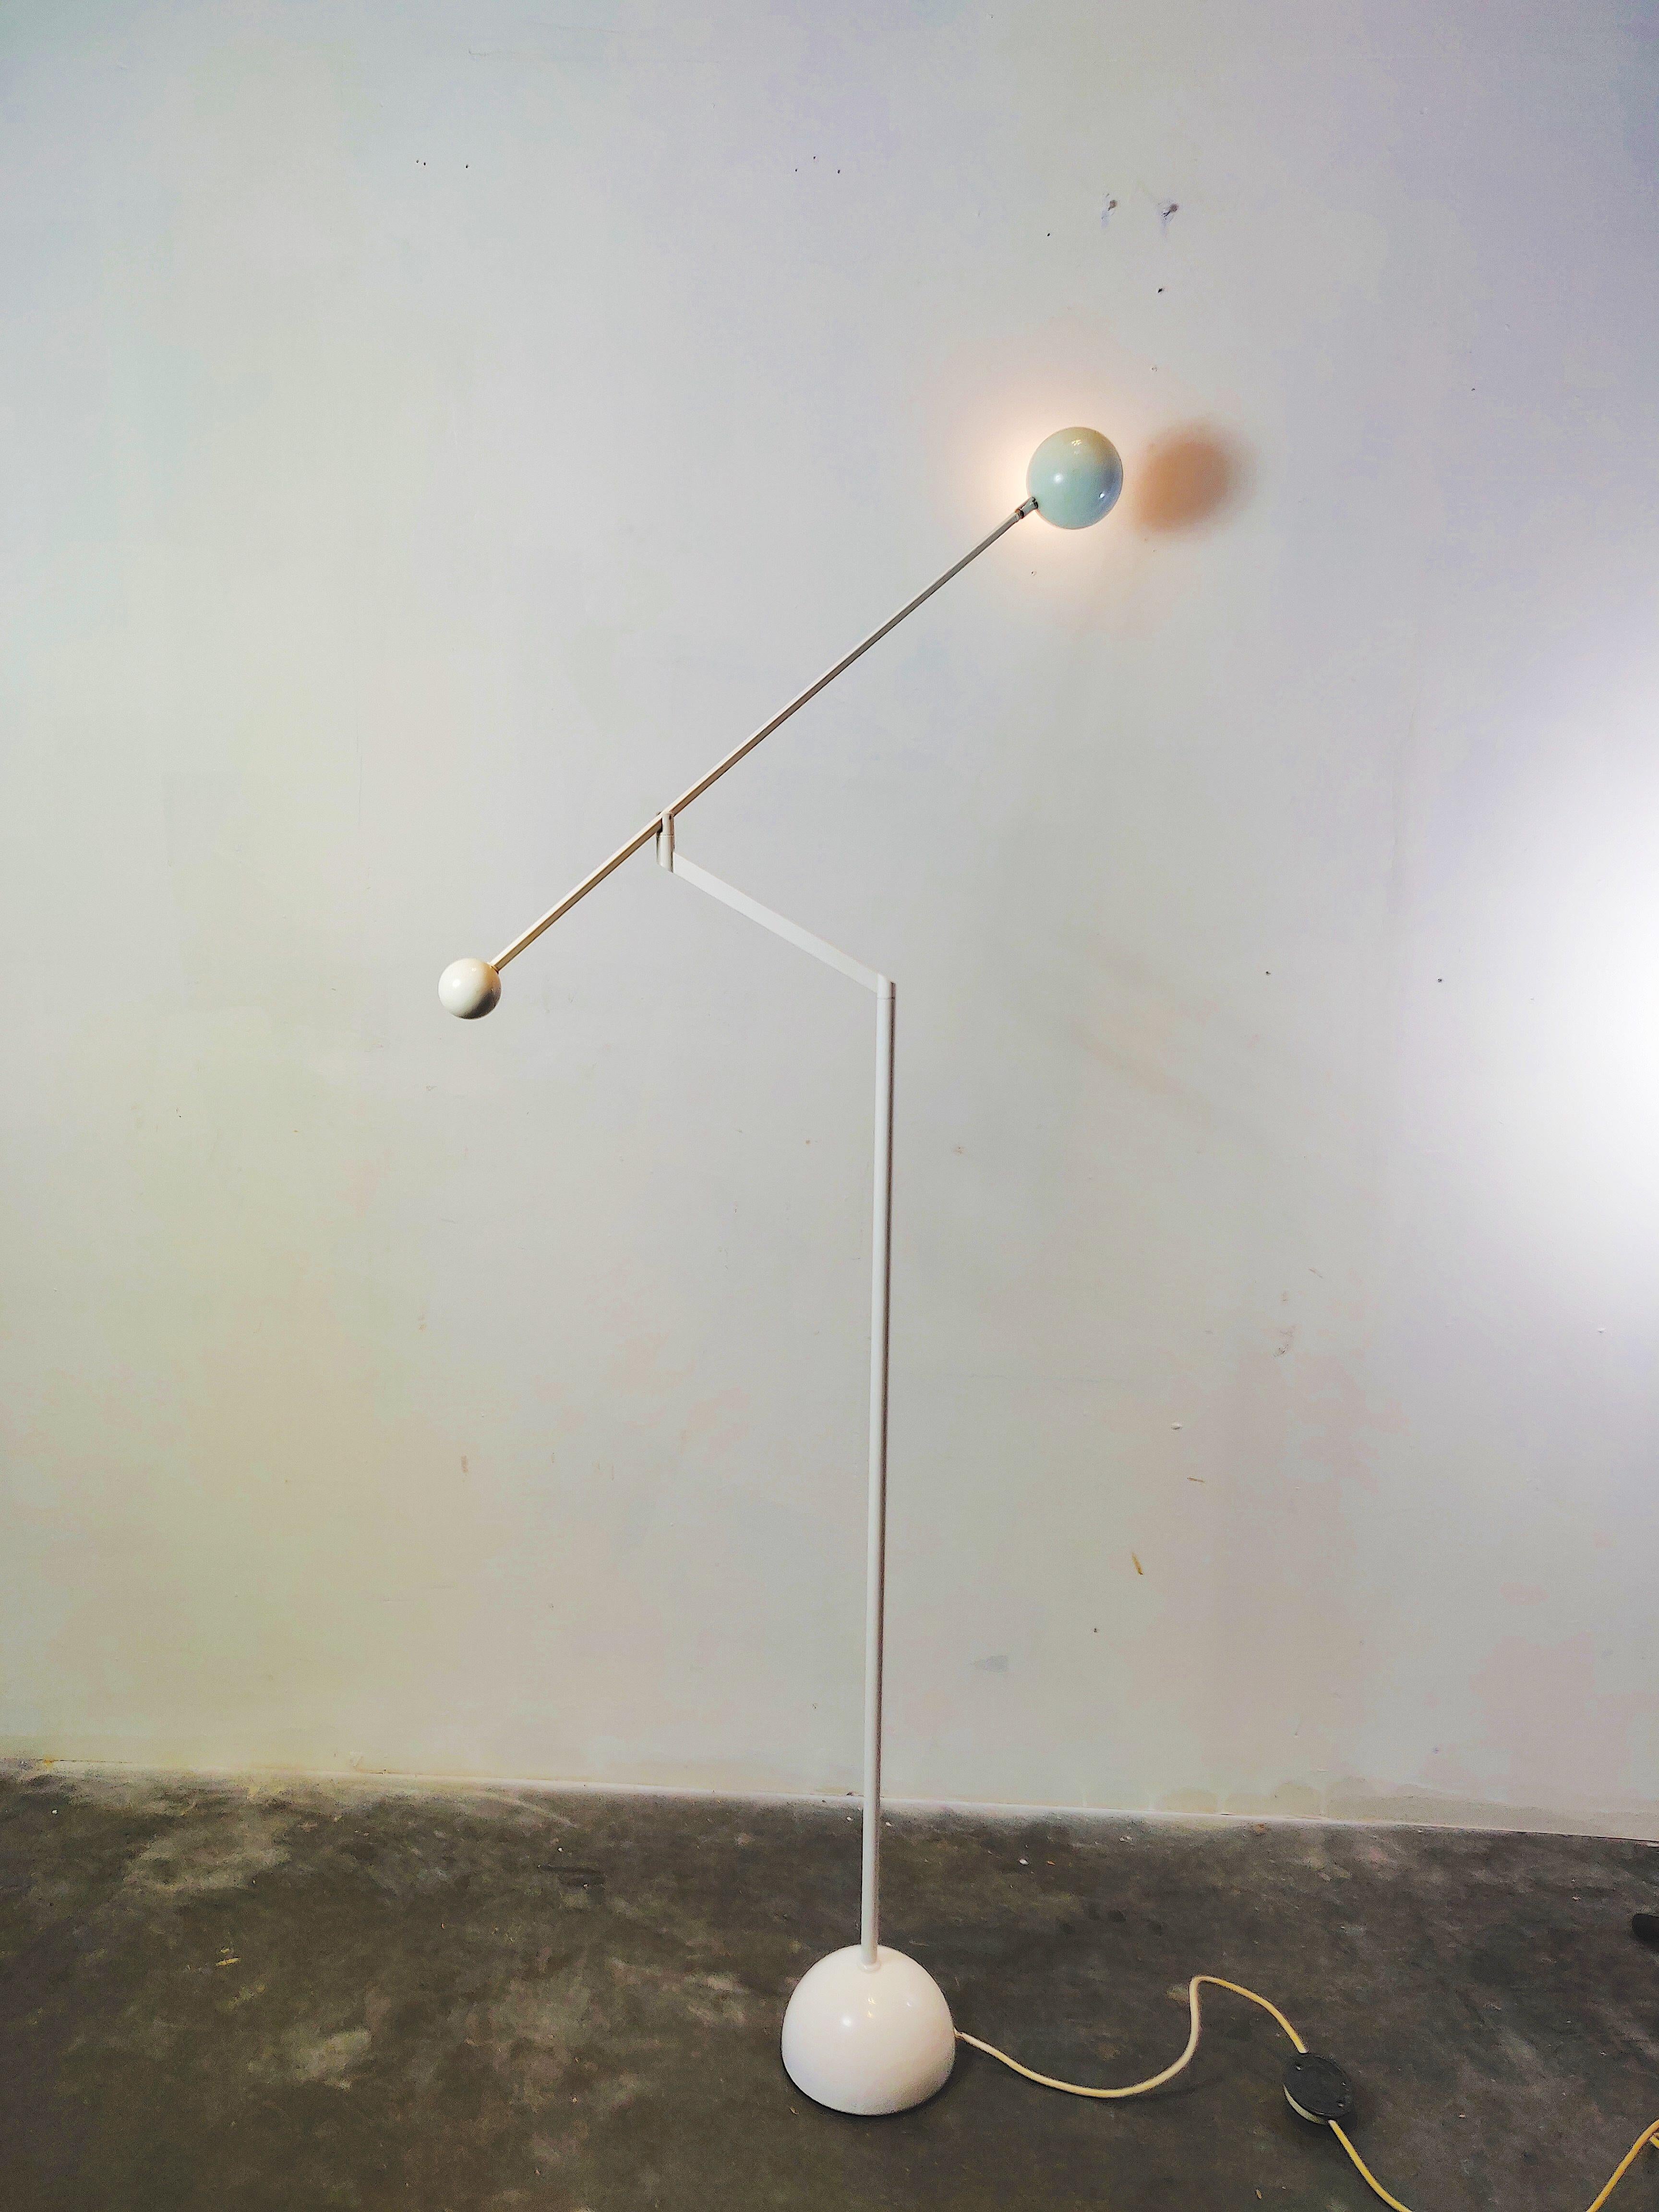 Design classic by Sölken leuchten, 1970s. 
This counter balance floor lamp is hight adjustable and you can position it in any direction. Halogen or led bulb
 A silhouette of round shapes connected by straight white lines. This 1970's halogen floor